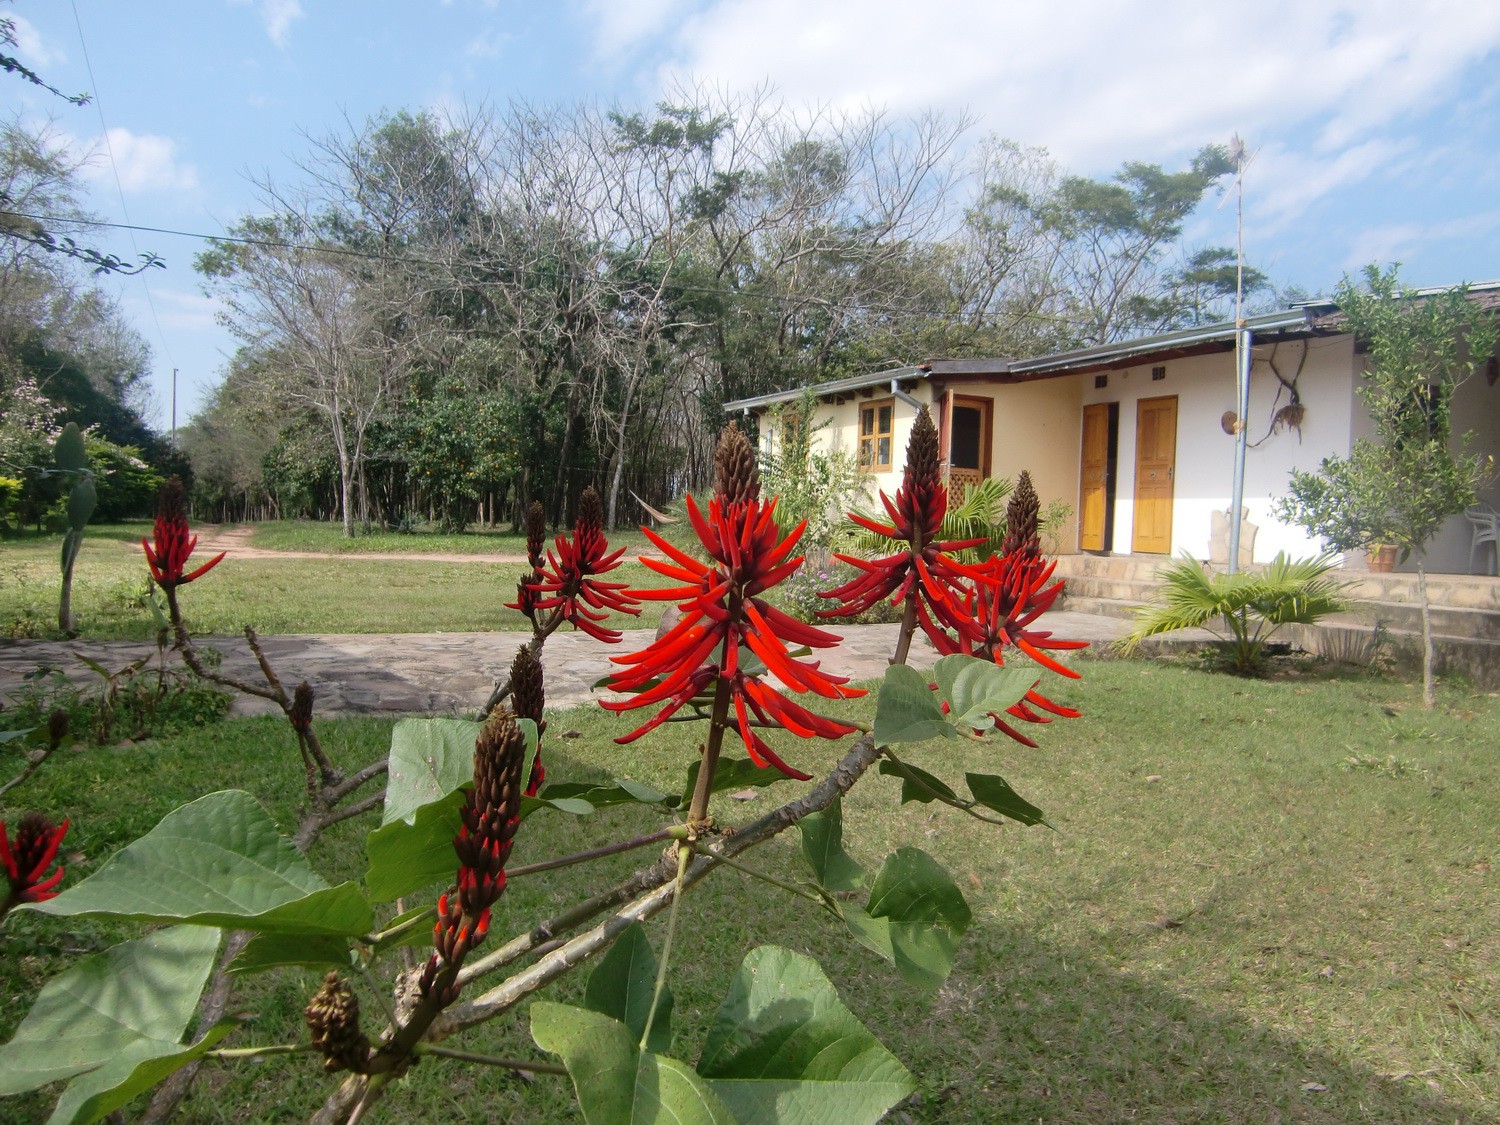 Flowers in our campgroung El Indio